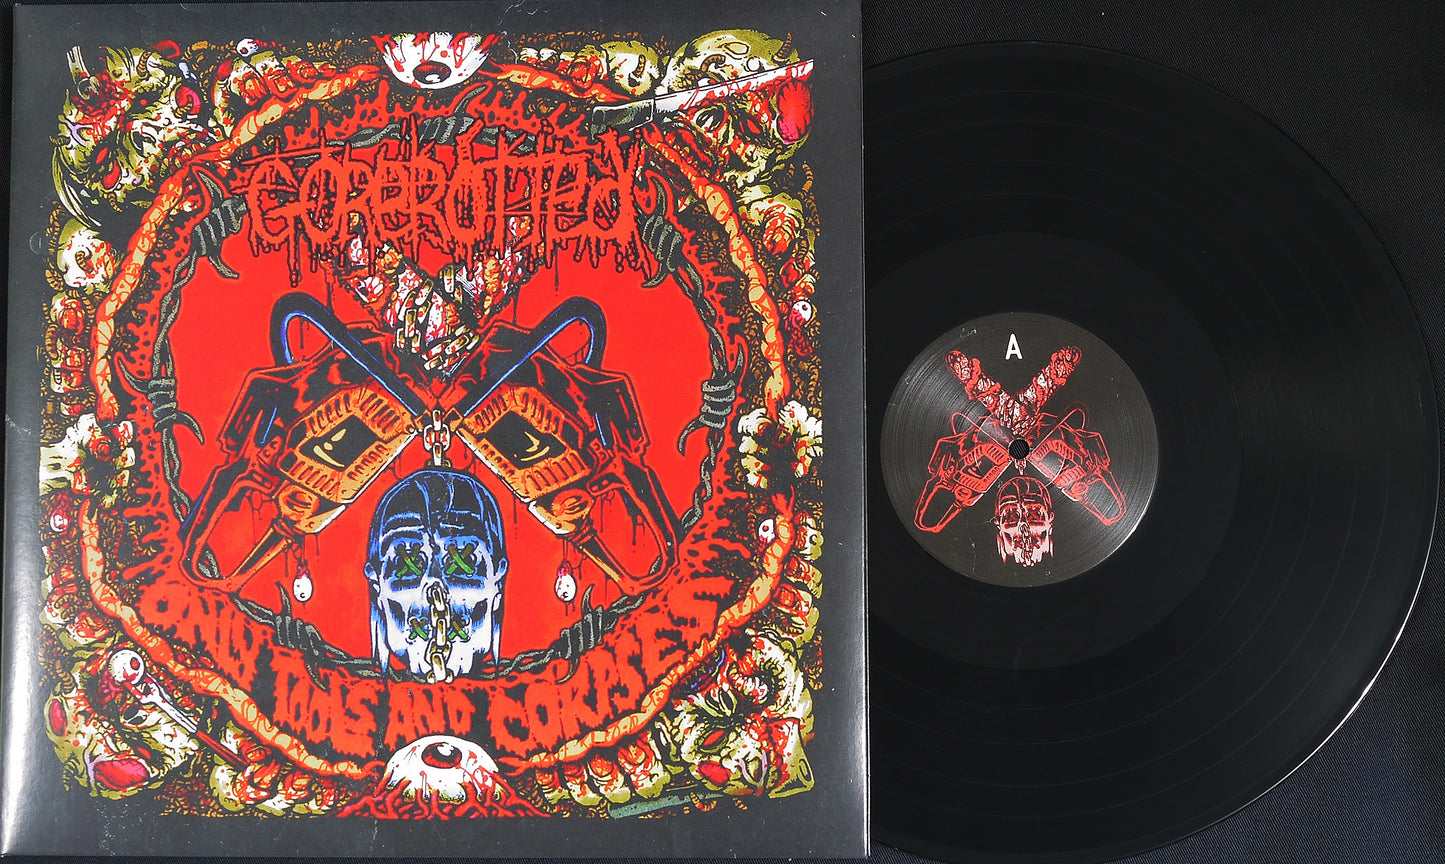 GOREROTTED - Only Tools And Corpses 12"